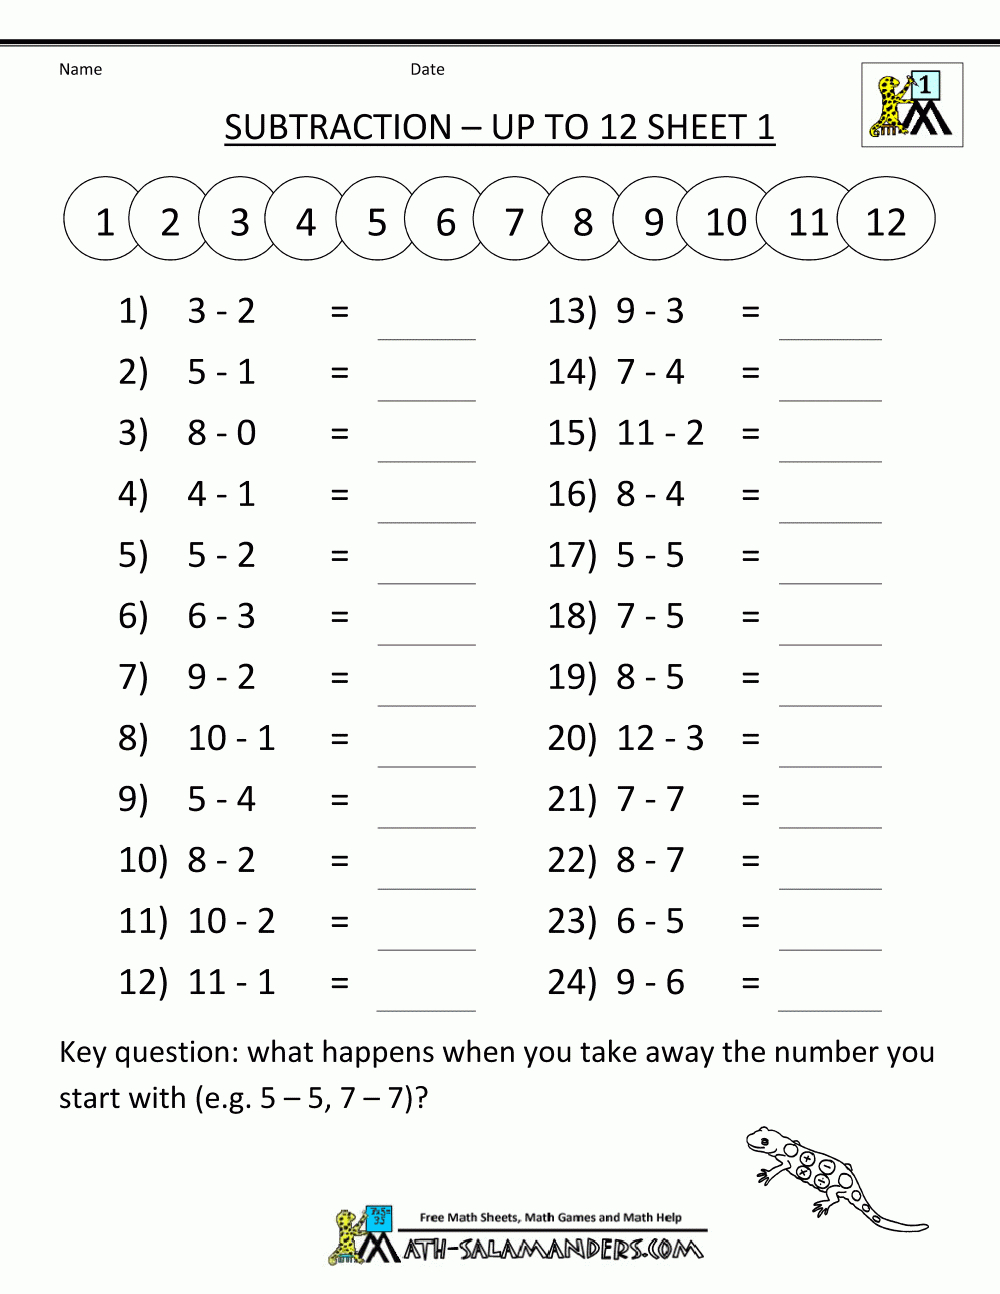 First-Grade-Math-Worksheets-Mental-Subtraction-To-12-1.gif for Multiplication Worksheets Nz